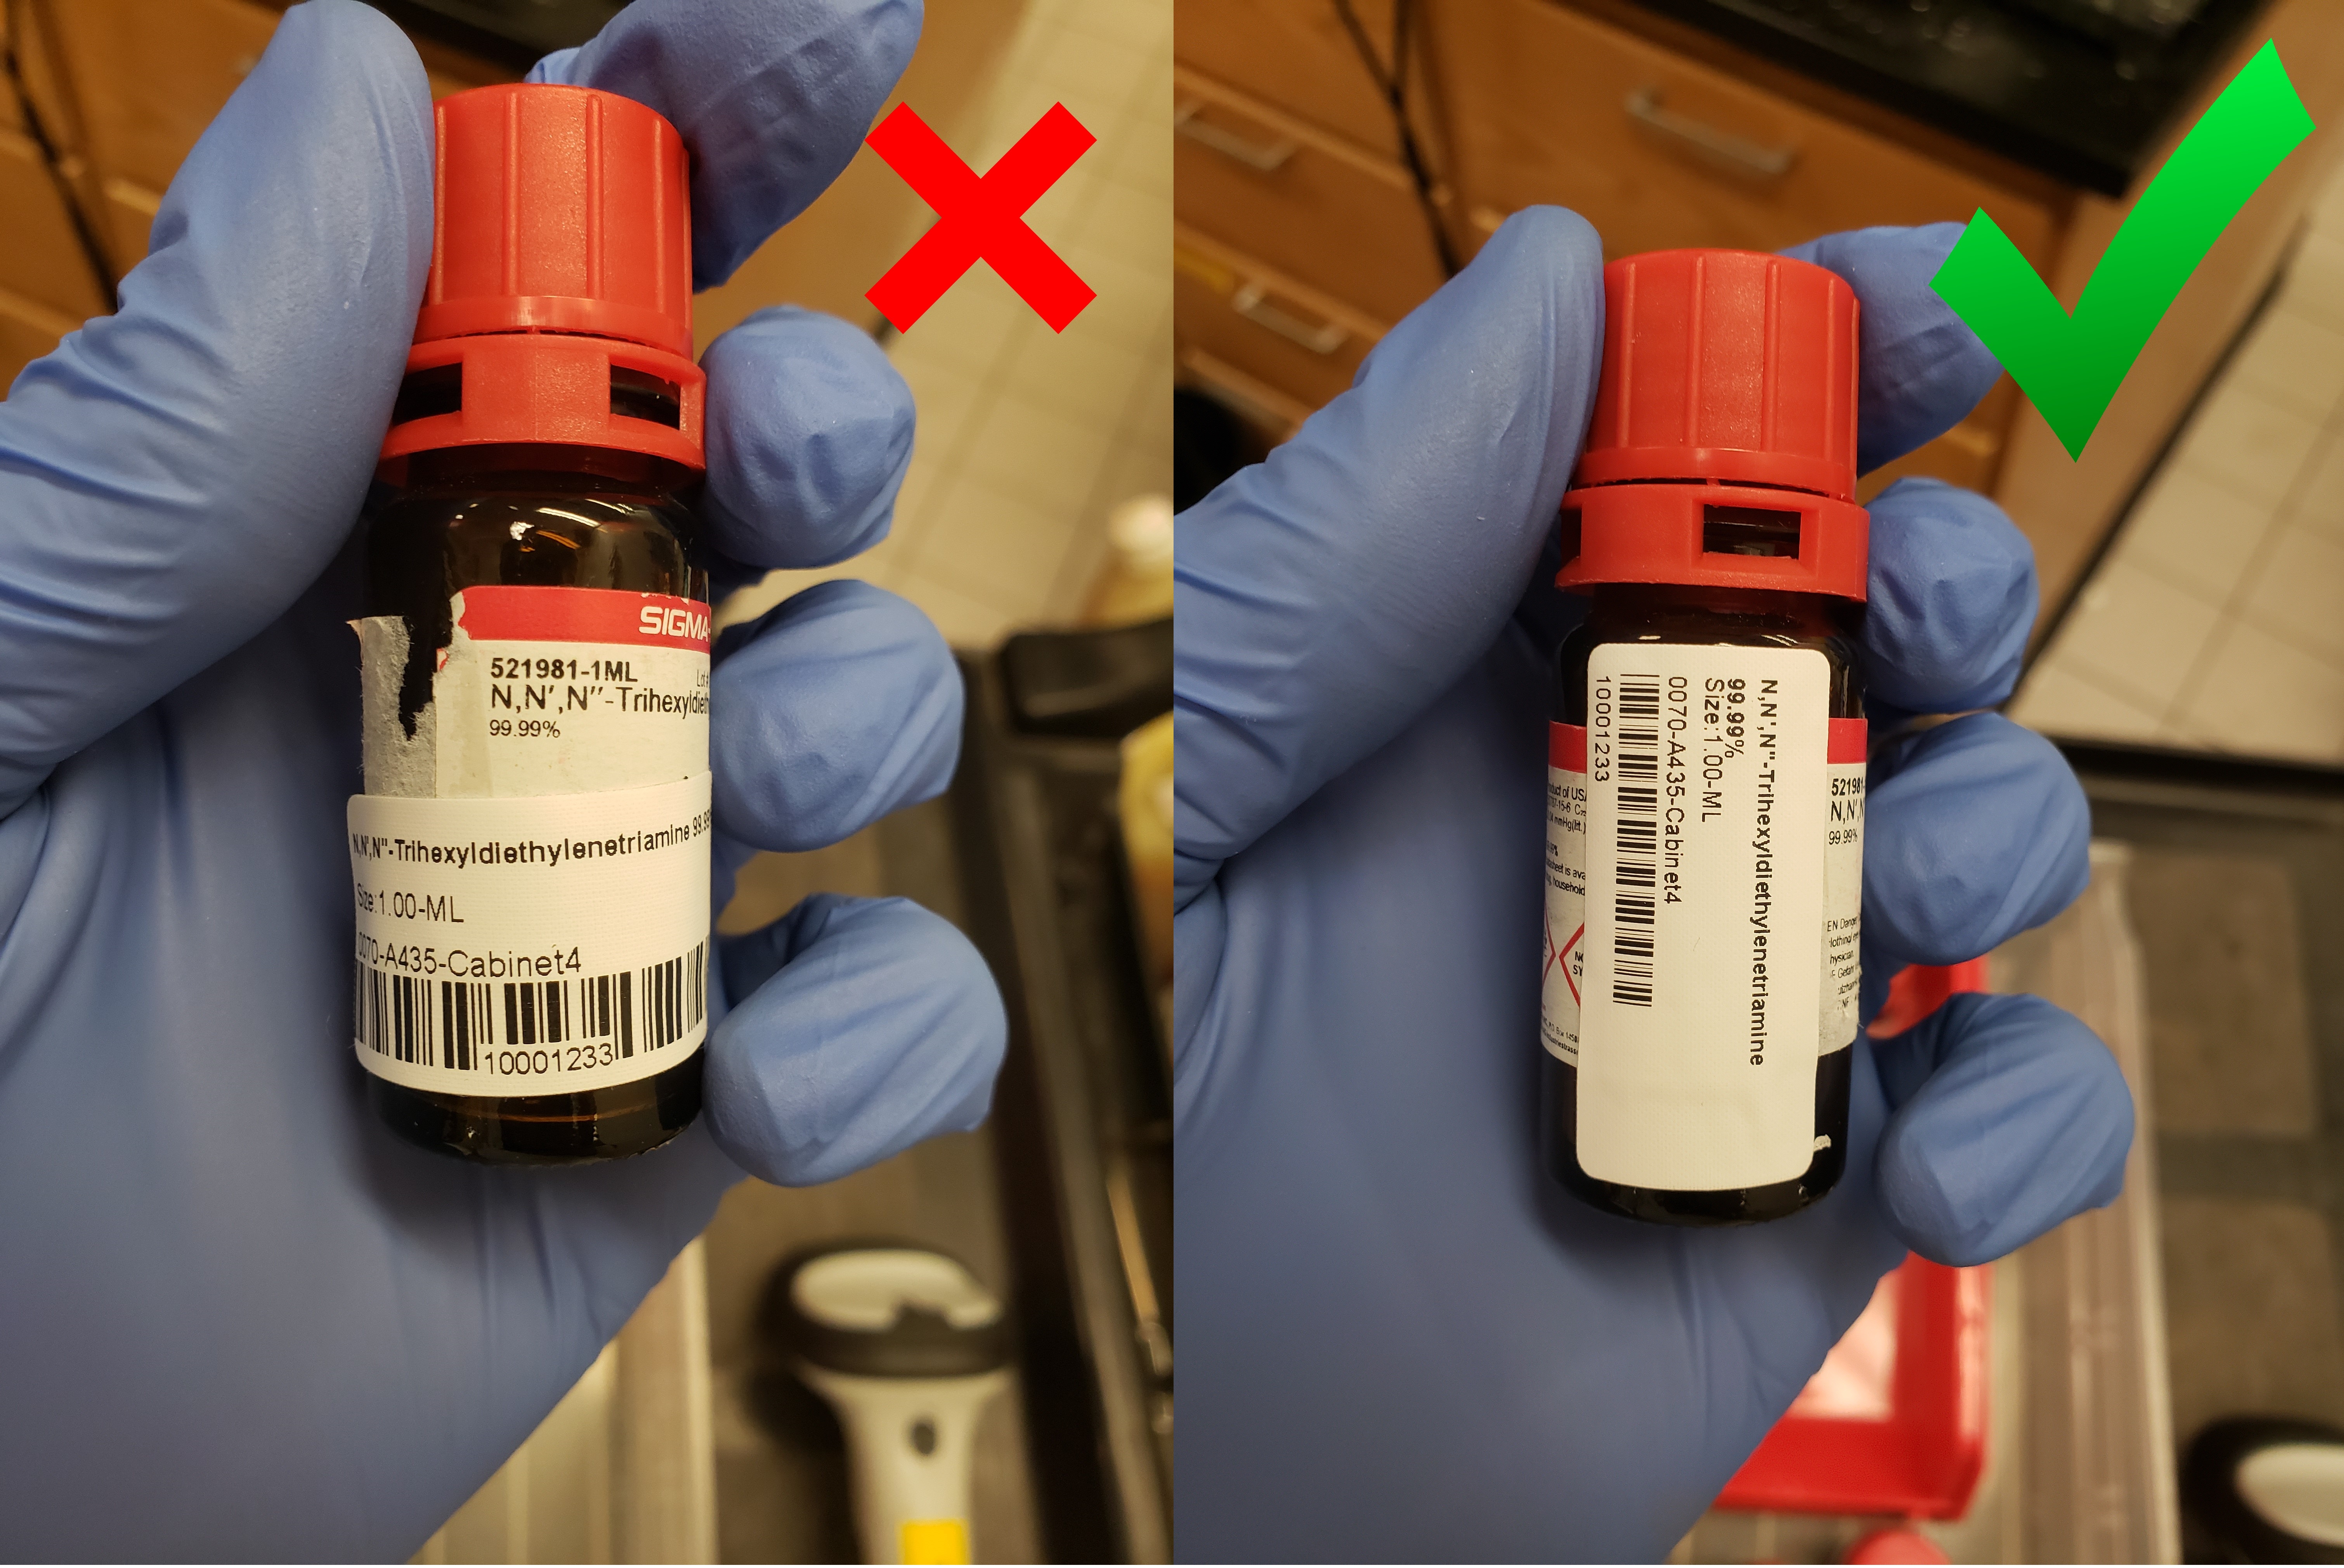 Picture Showing Right and Wrong Orientation for Label on Skinny Container